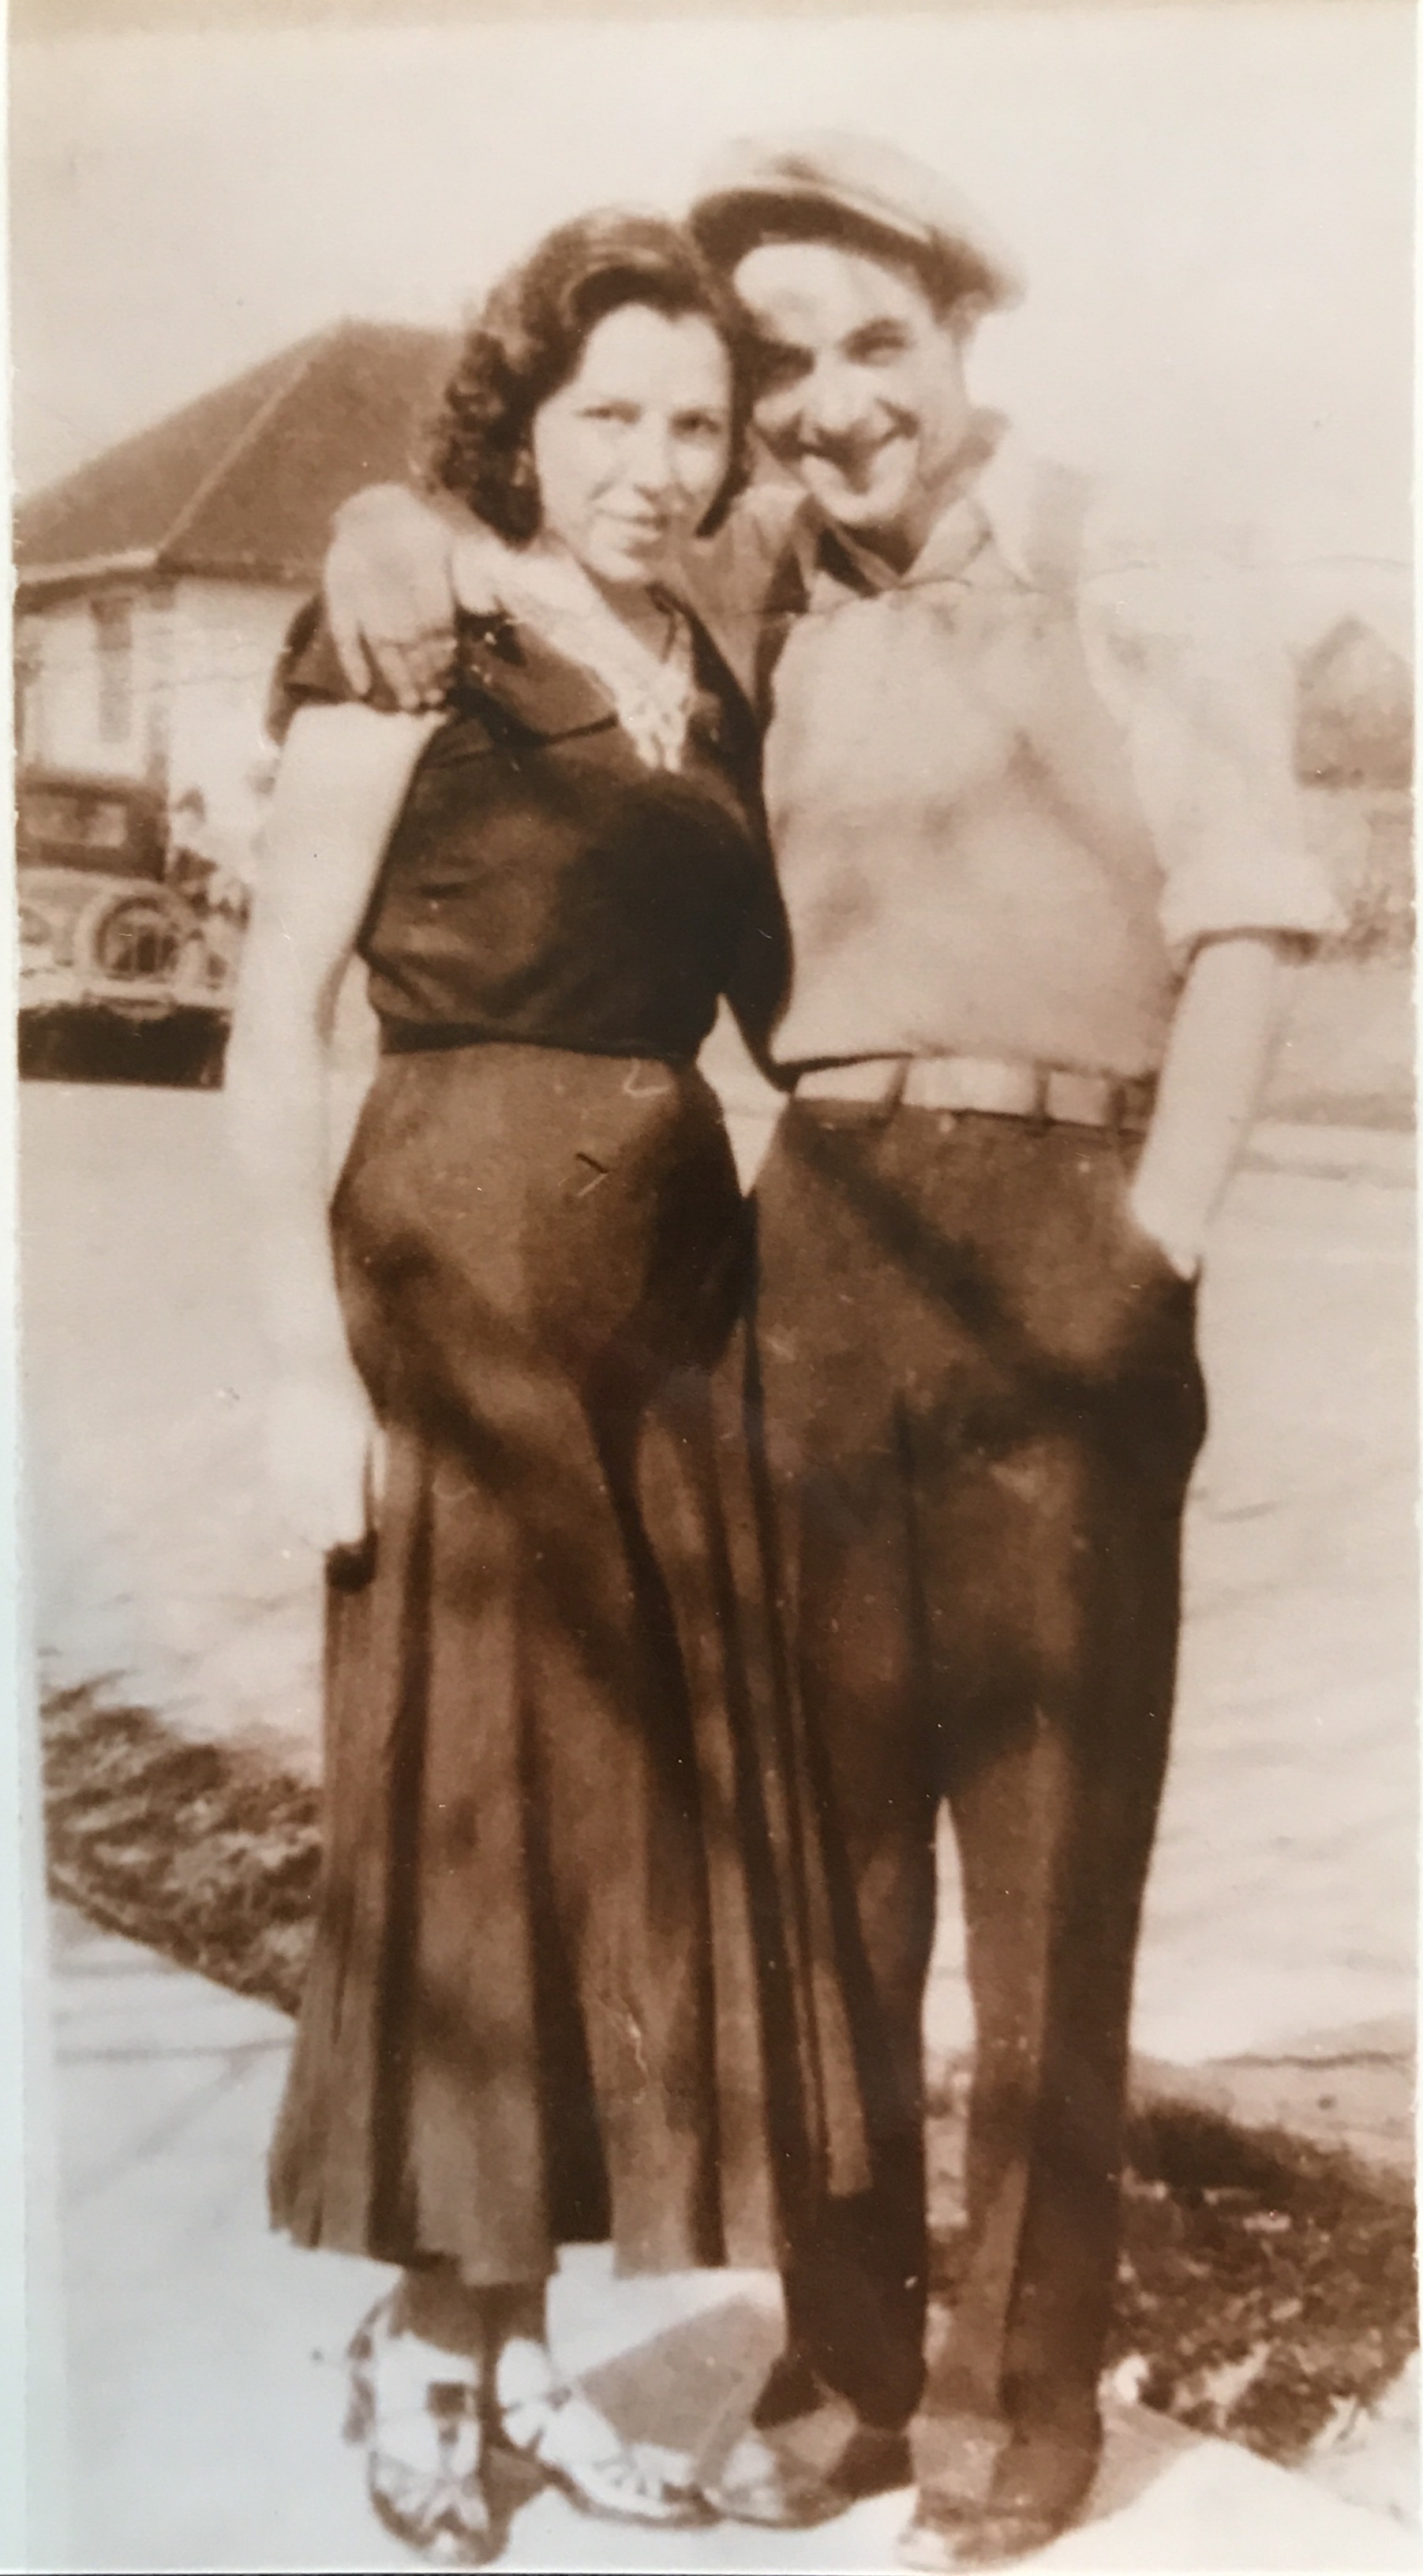 This is my husband's grandparents Laverne and Dave Cameron on January 18, 1933. It was taken the day after they were married by a justice of the peace in Vancouver,  Washington. They went to Washington because they were too young to legally get married in their hometown of Portland Oregon. 